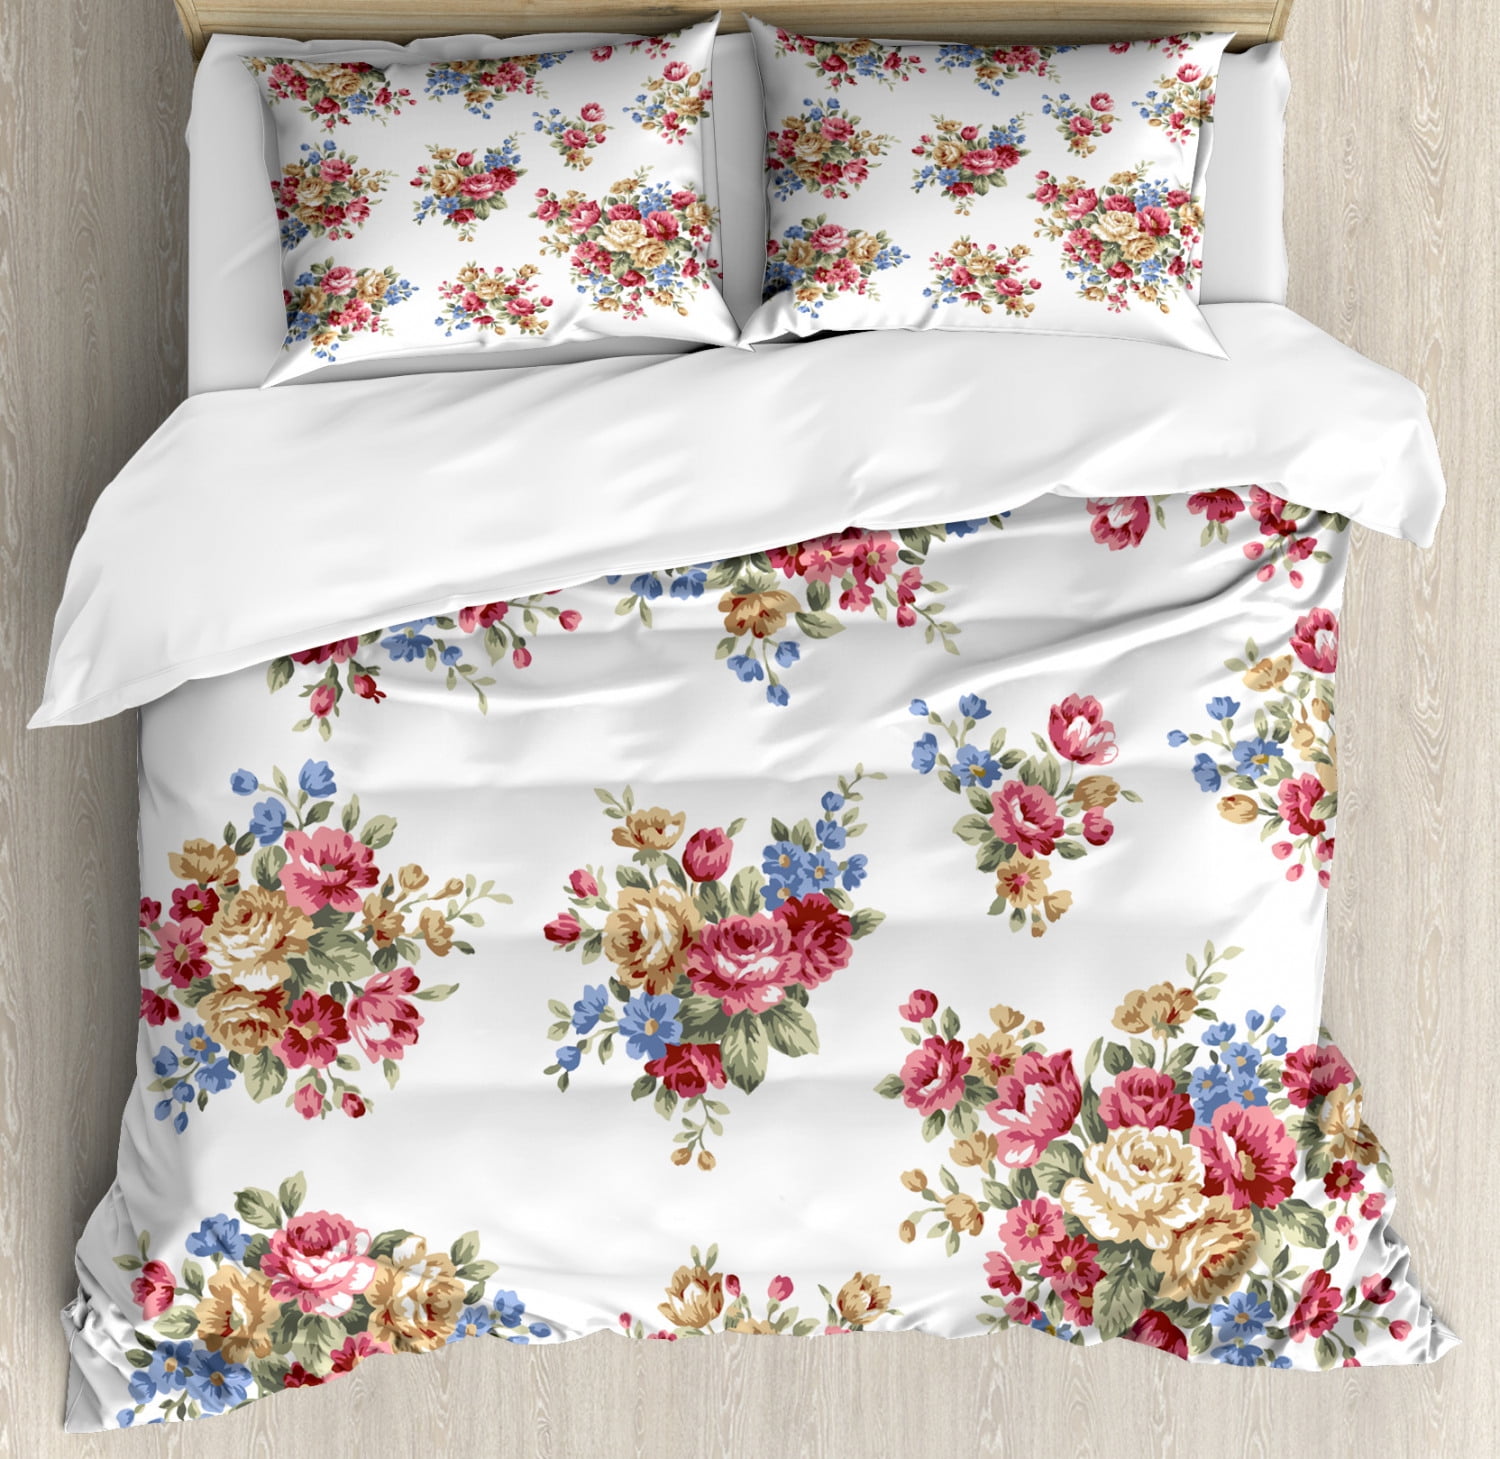 3DRose Duvet Cover Set Girls Woman Adults Rose Floral Print Comforter Cover Romantic Flowers Pattern Bedding Set Valentine's Day Quilt Cover